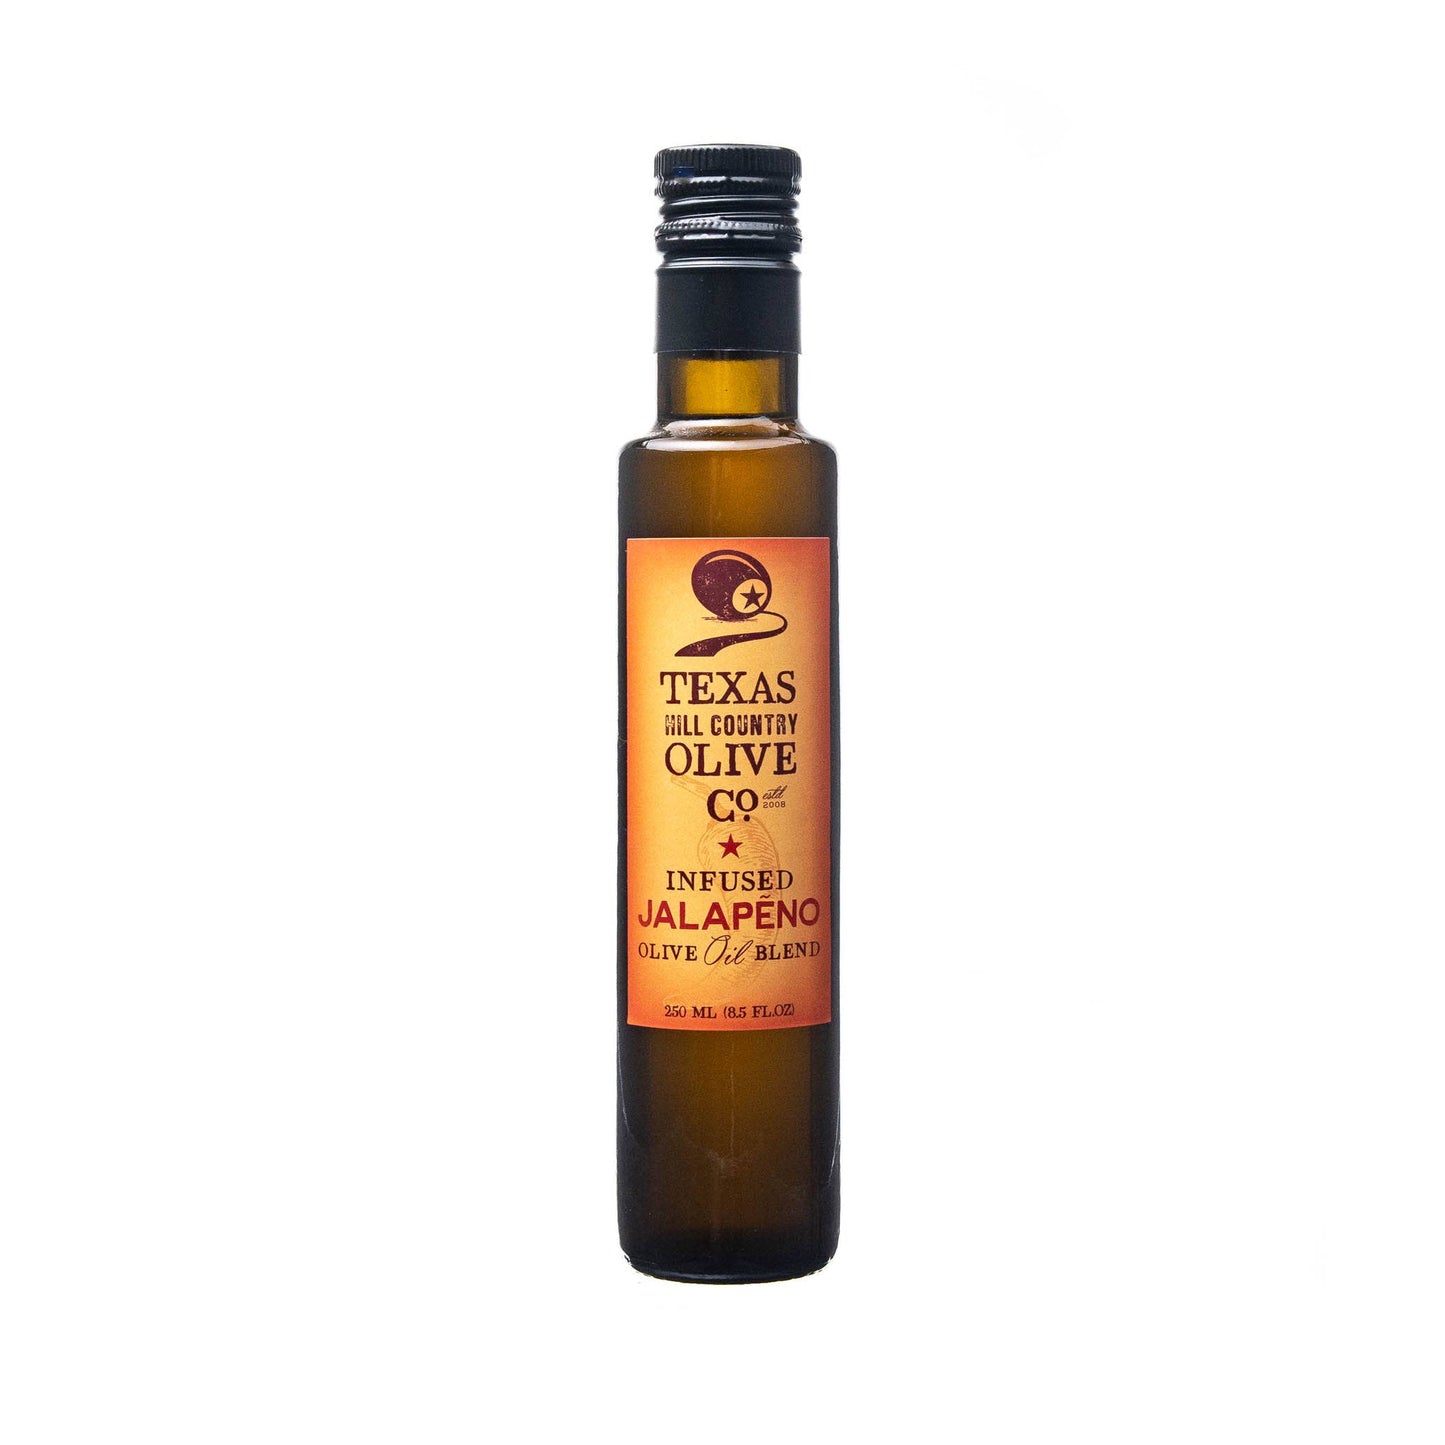 Texas Hill Country Olive Co. - Jalapeno Infused Olive Oil - 250ml